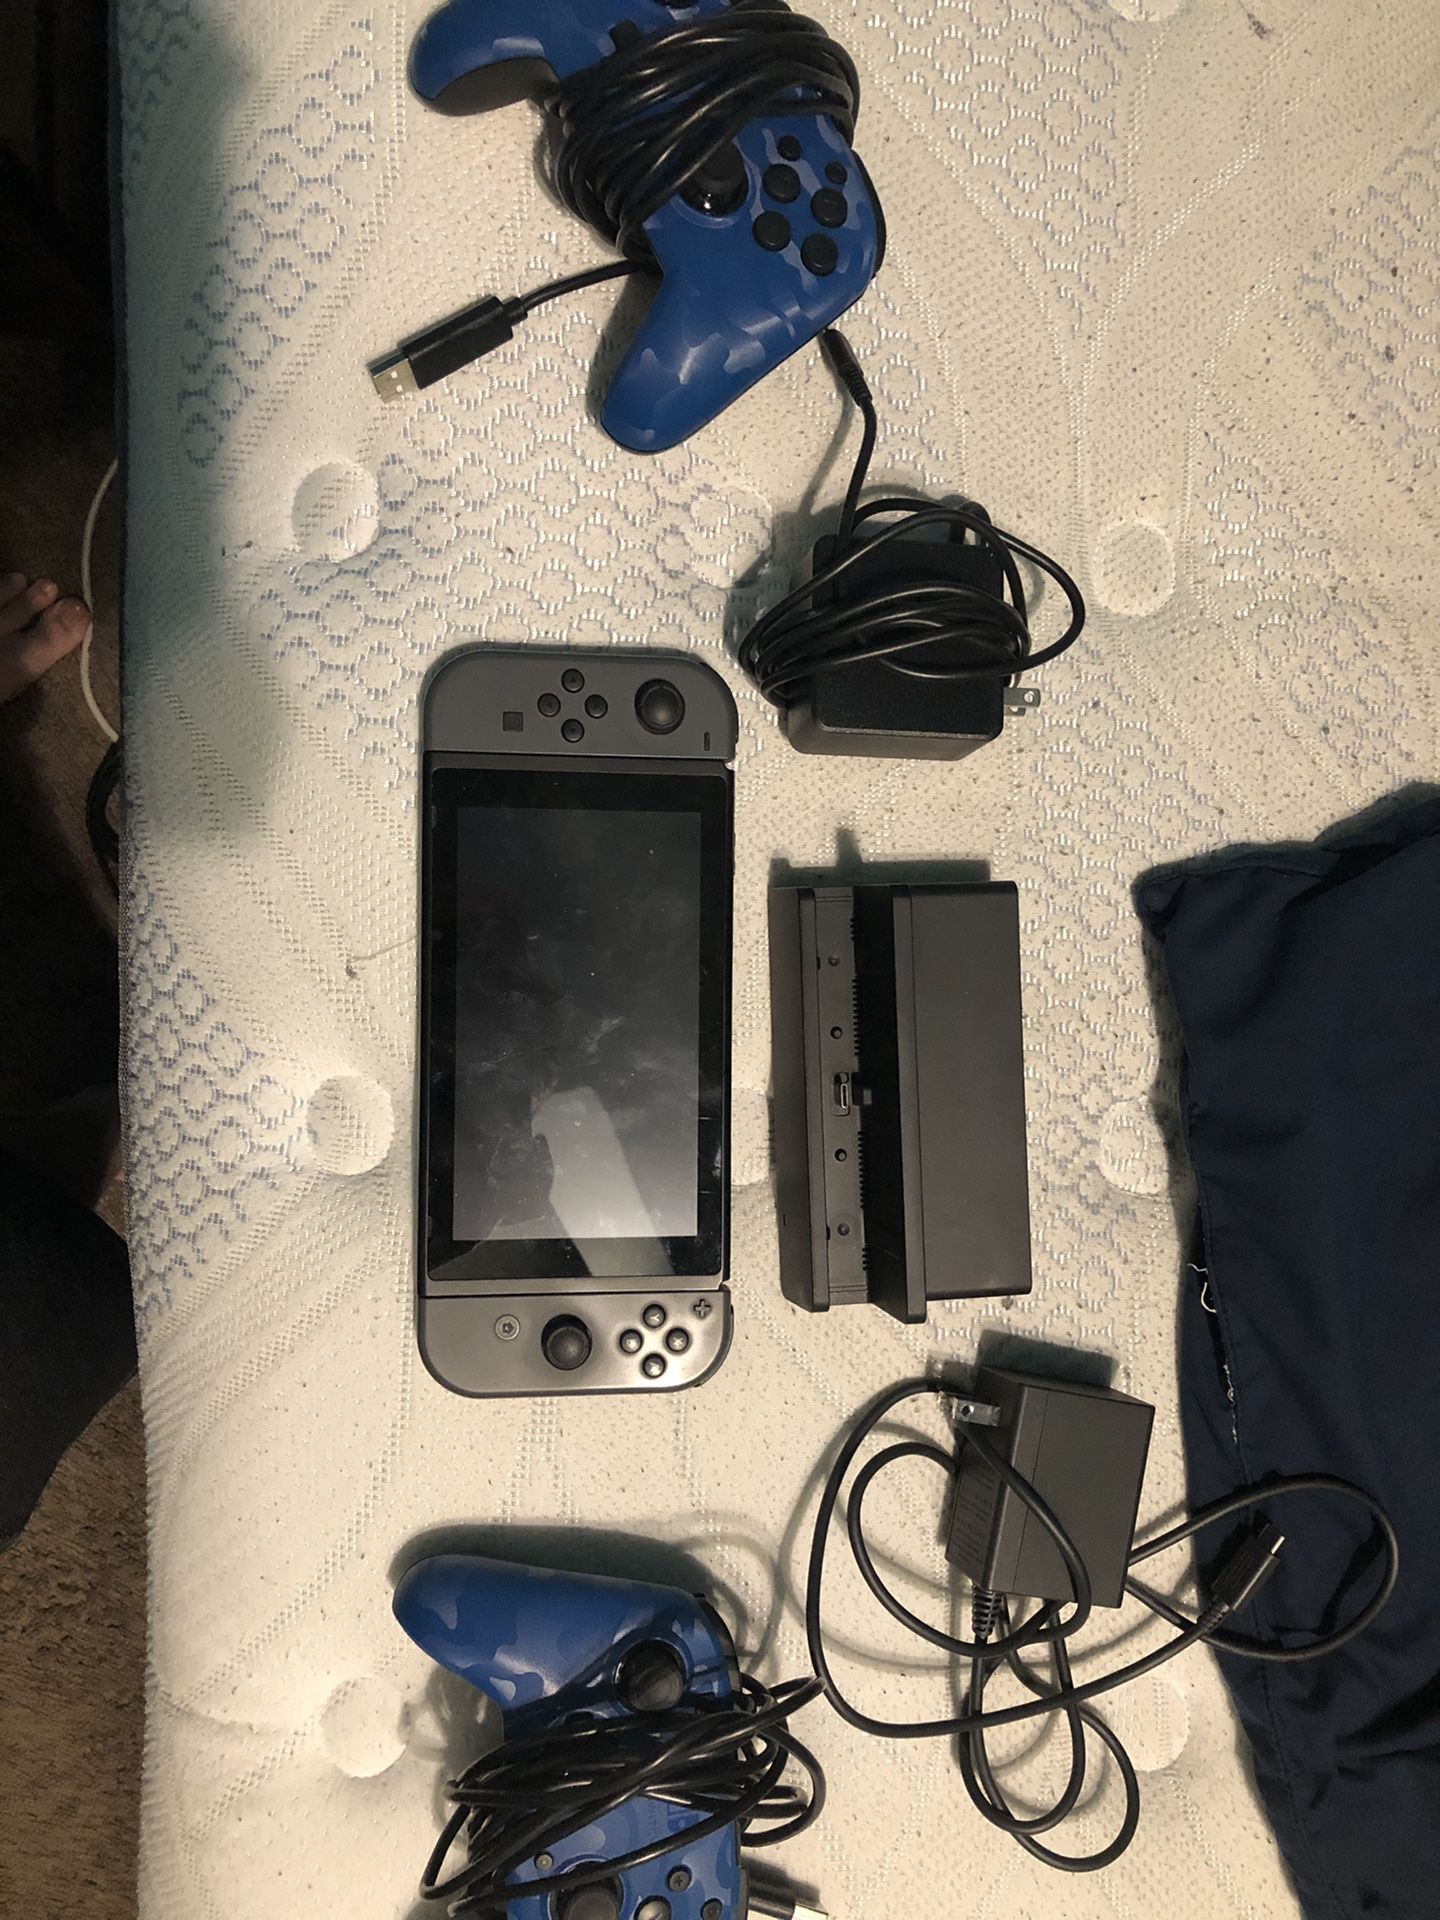 NINTENDO SWITCH WITH 2 CONTROLLERS 2 CHARGERS, DOCK, GAMES